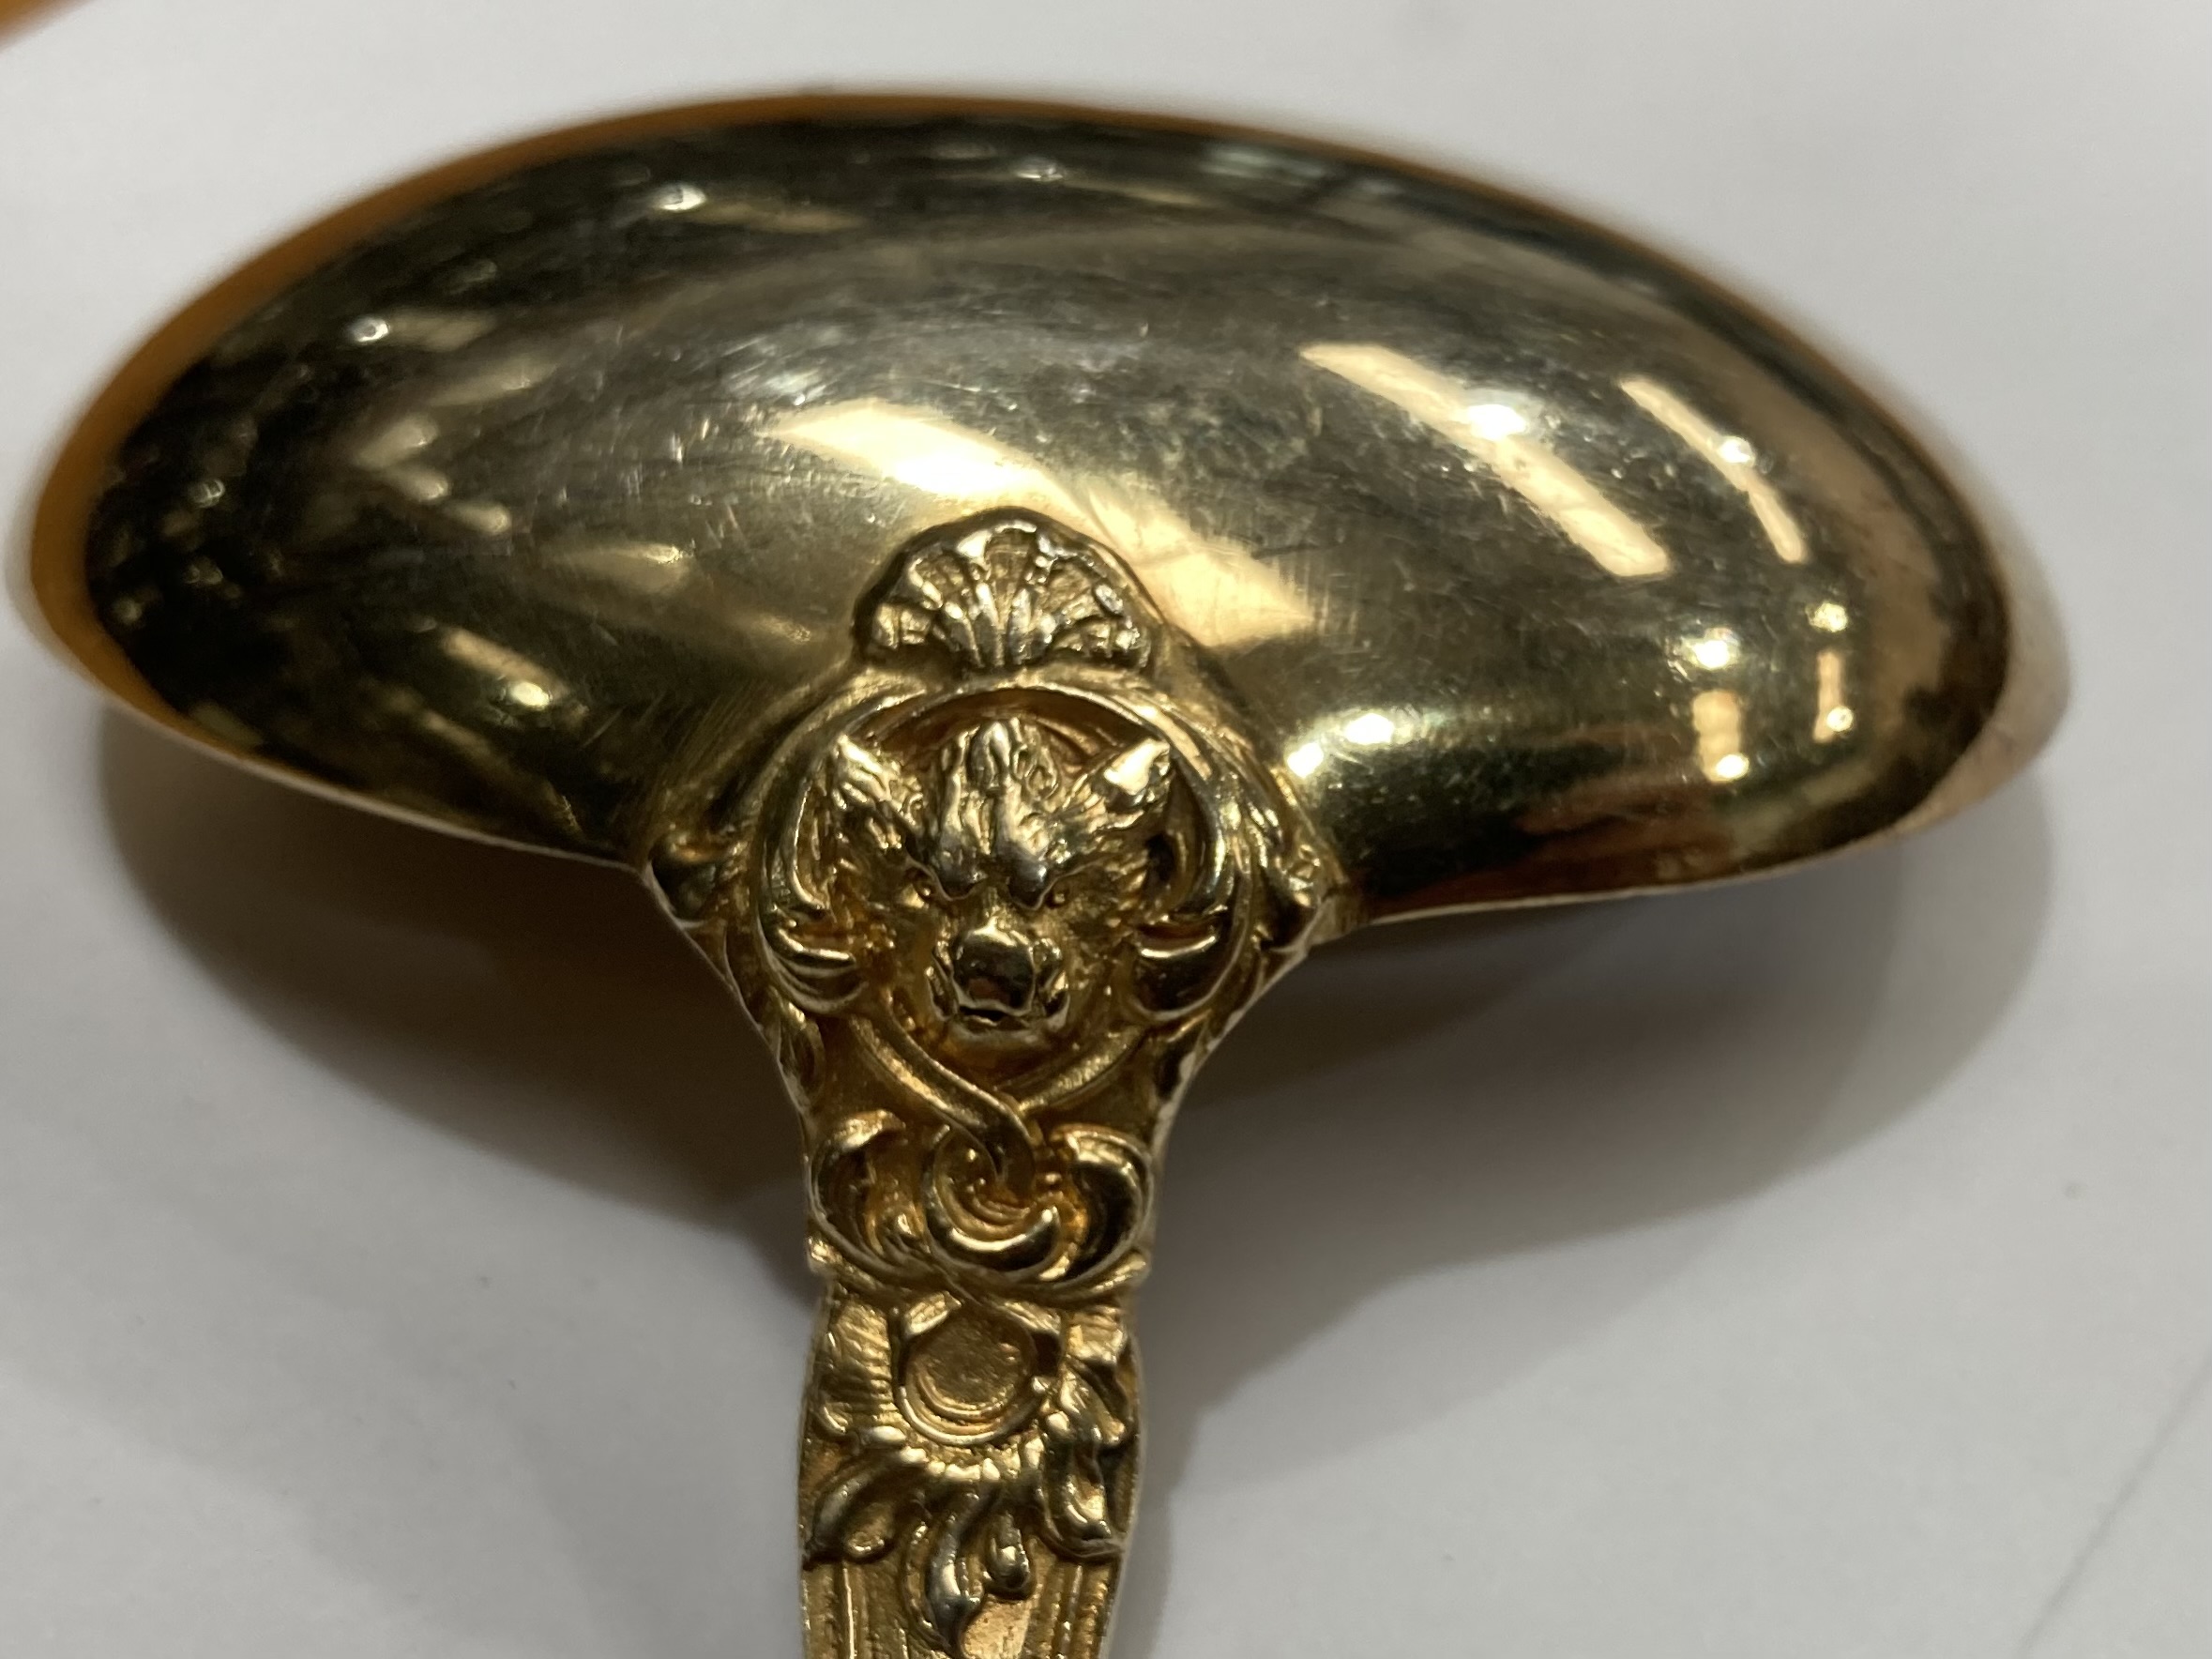 A FRENCH RARE SILVER-GILT SAUCE LADLE, EARLY 19TH CENTURY - Image 5 of 5